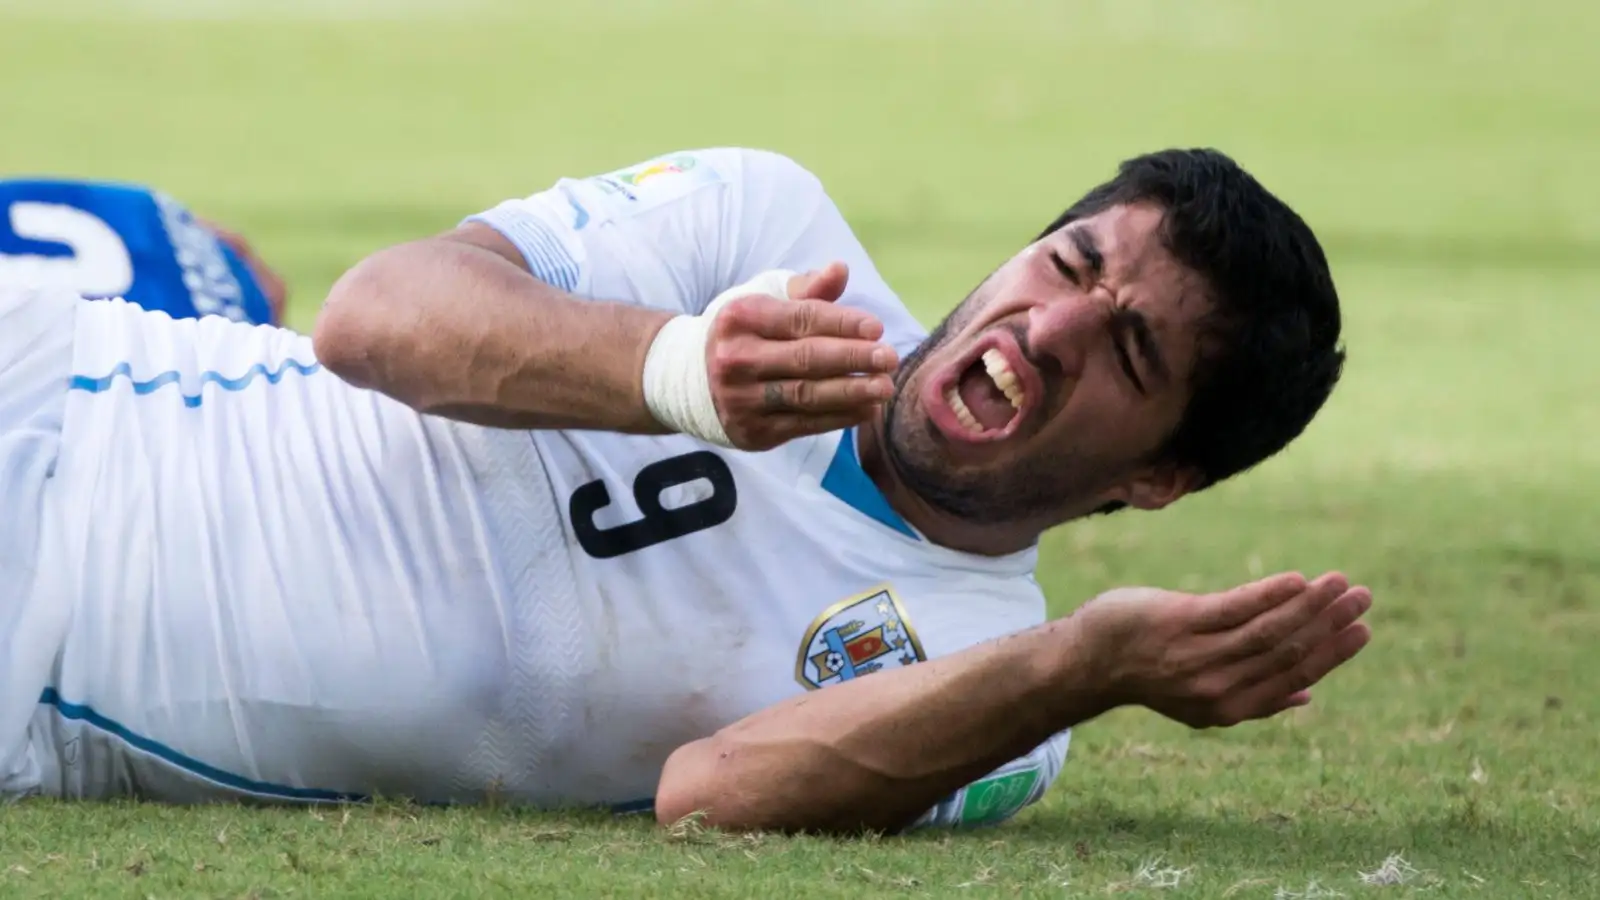 Remembering when Luis Suarez stole the show at the 2014 World Cup – for all the wrong reasons